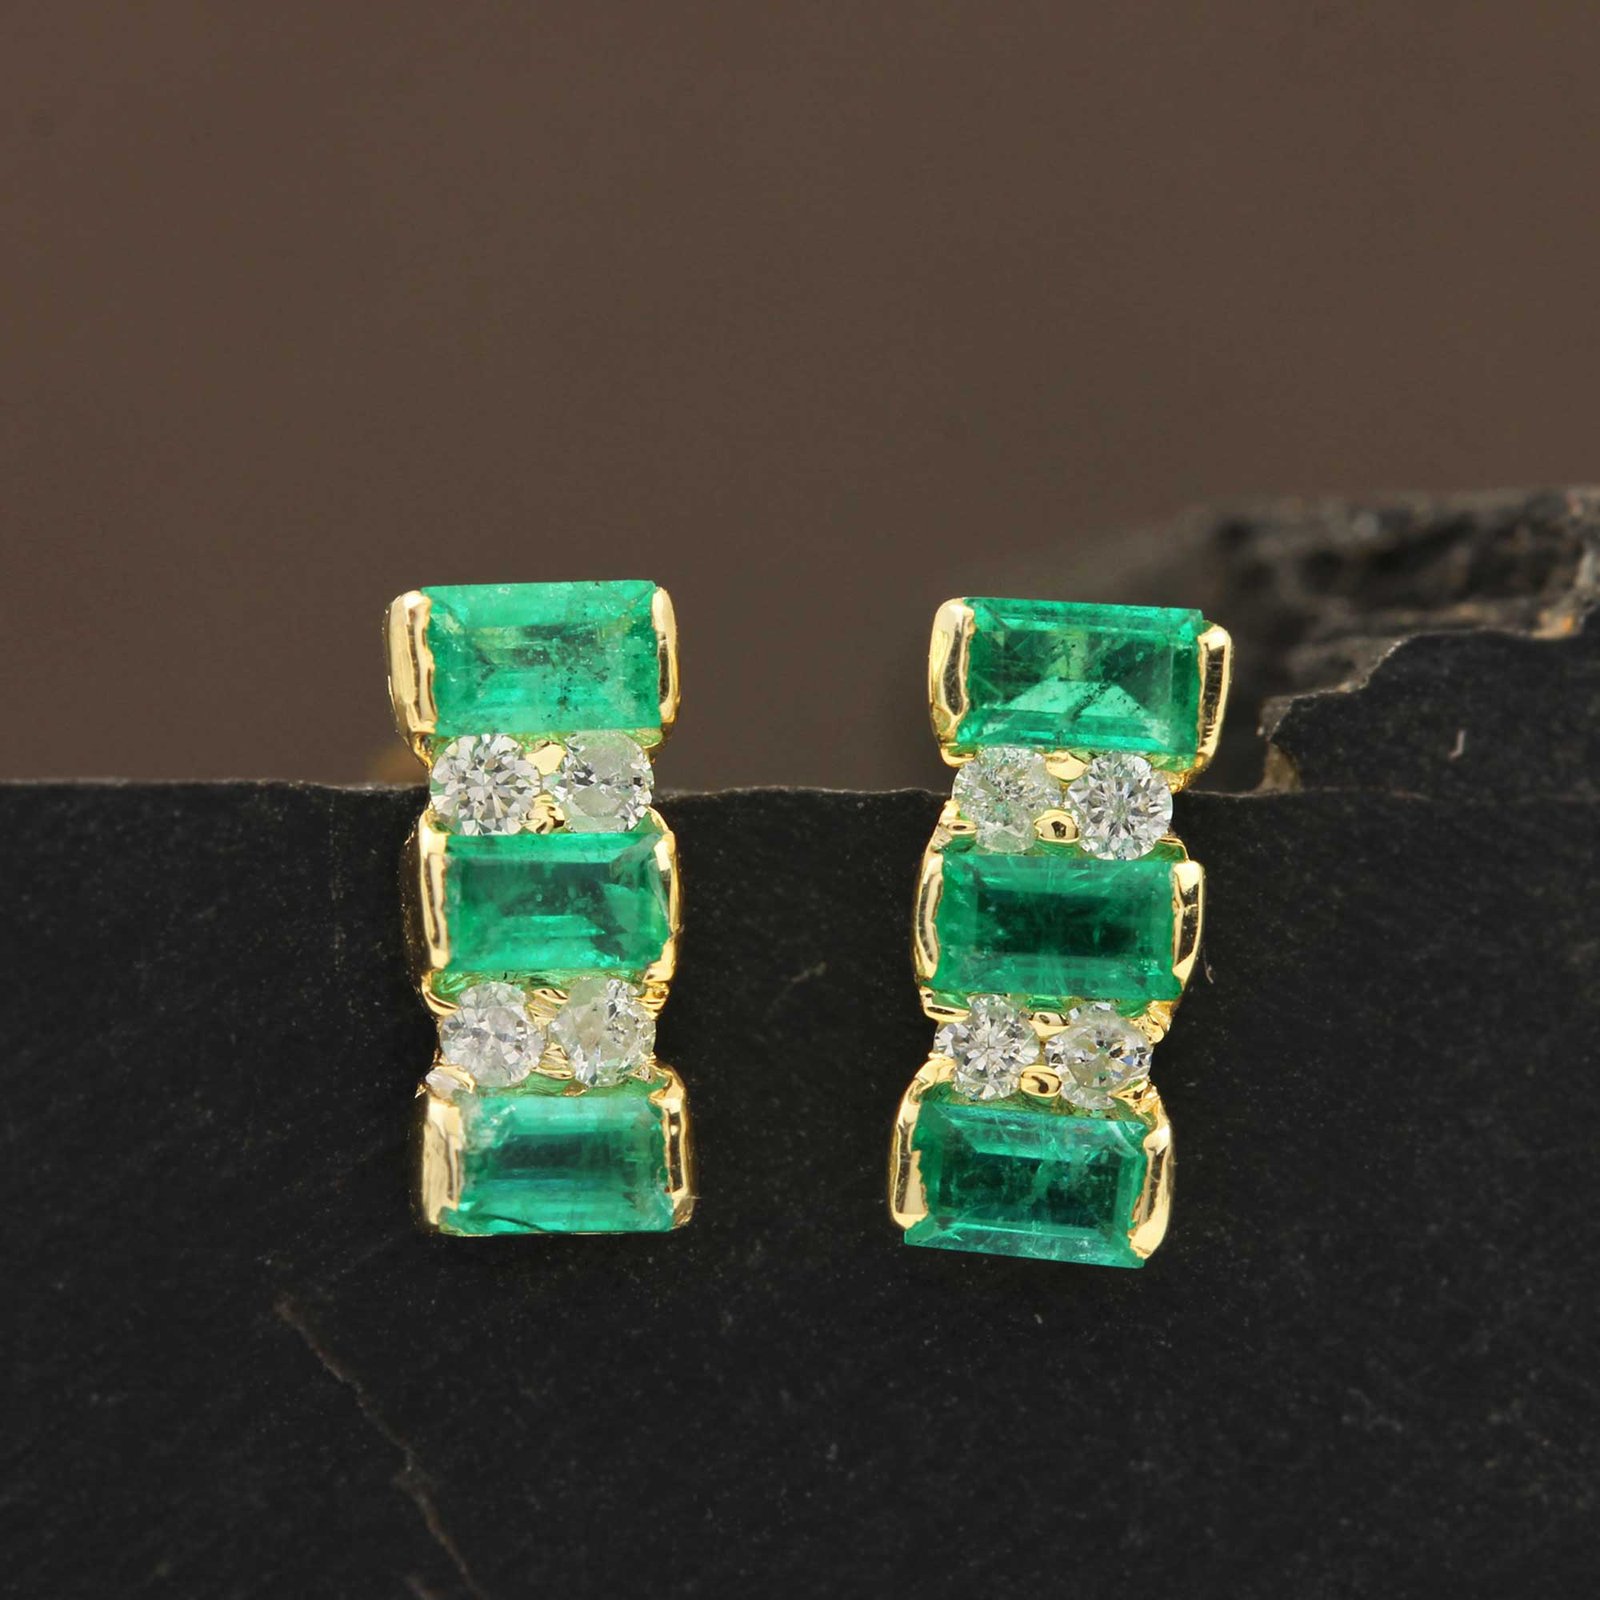 14k Solid Gold Stud Earrings Adorned With Diamond & Solitaire Emerald Gemstone